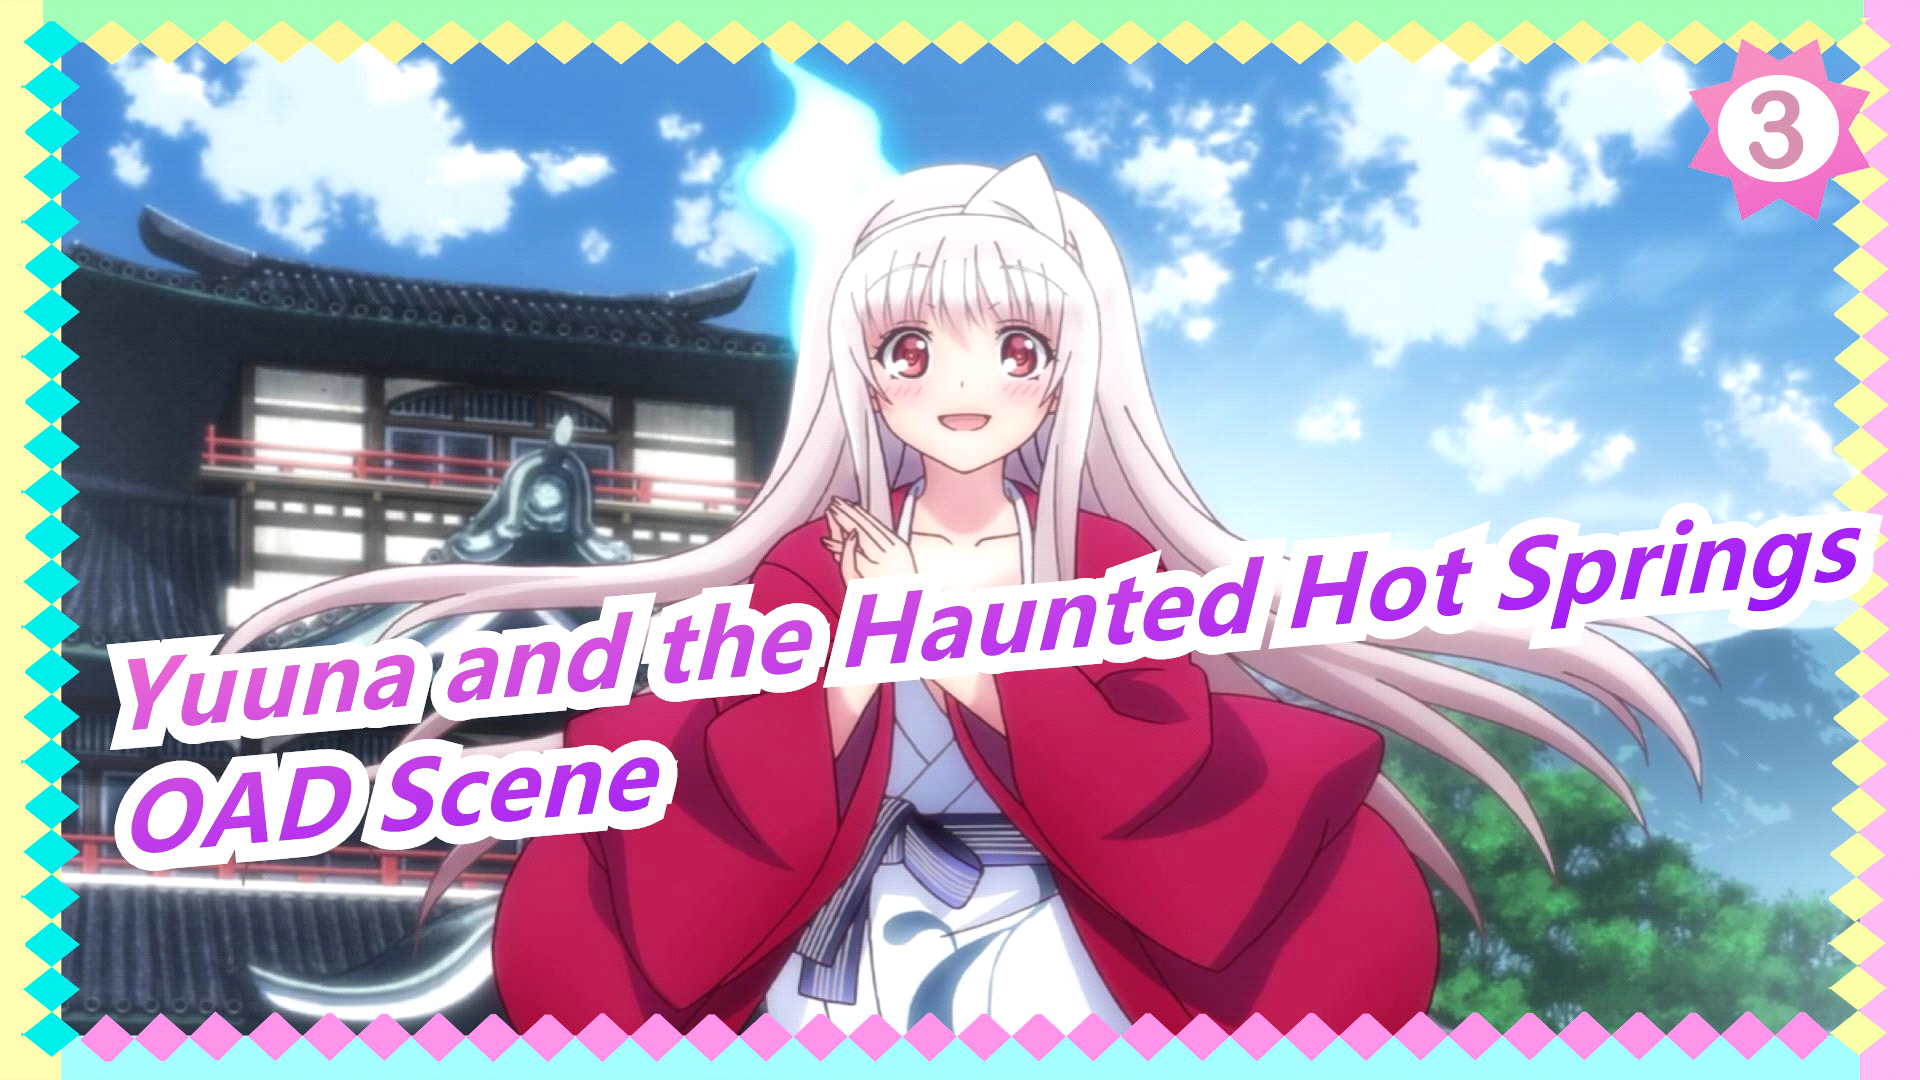 Yuuna and the Haunted Hot Springs - streaming online